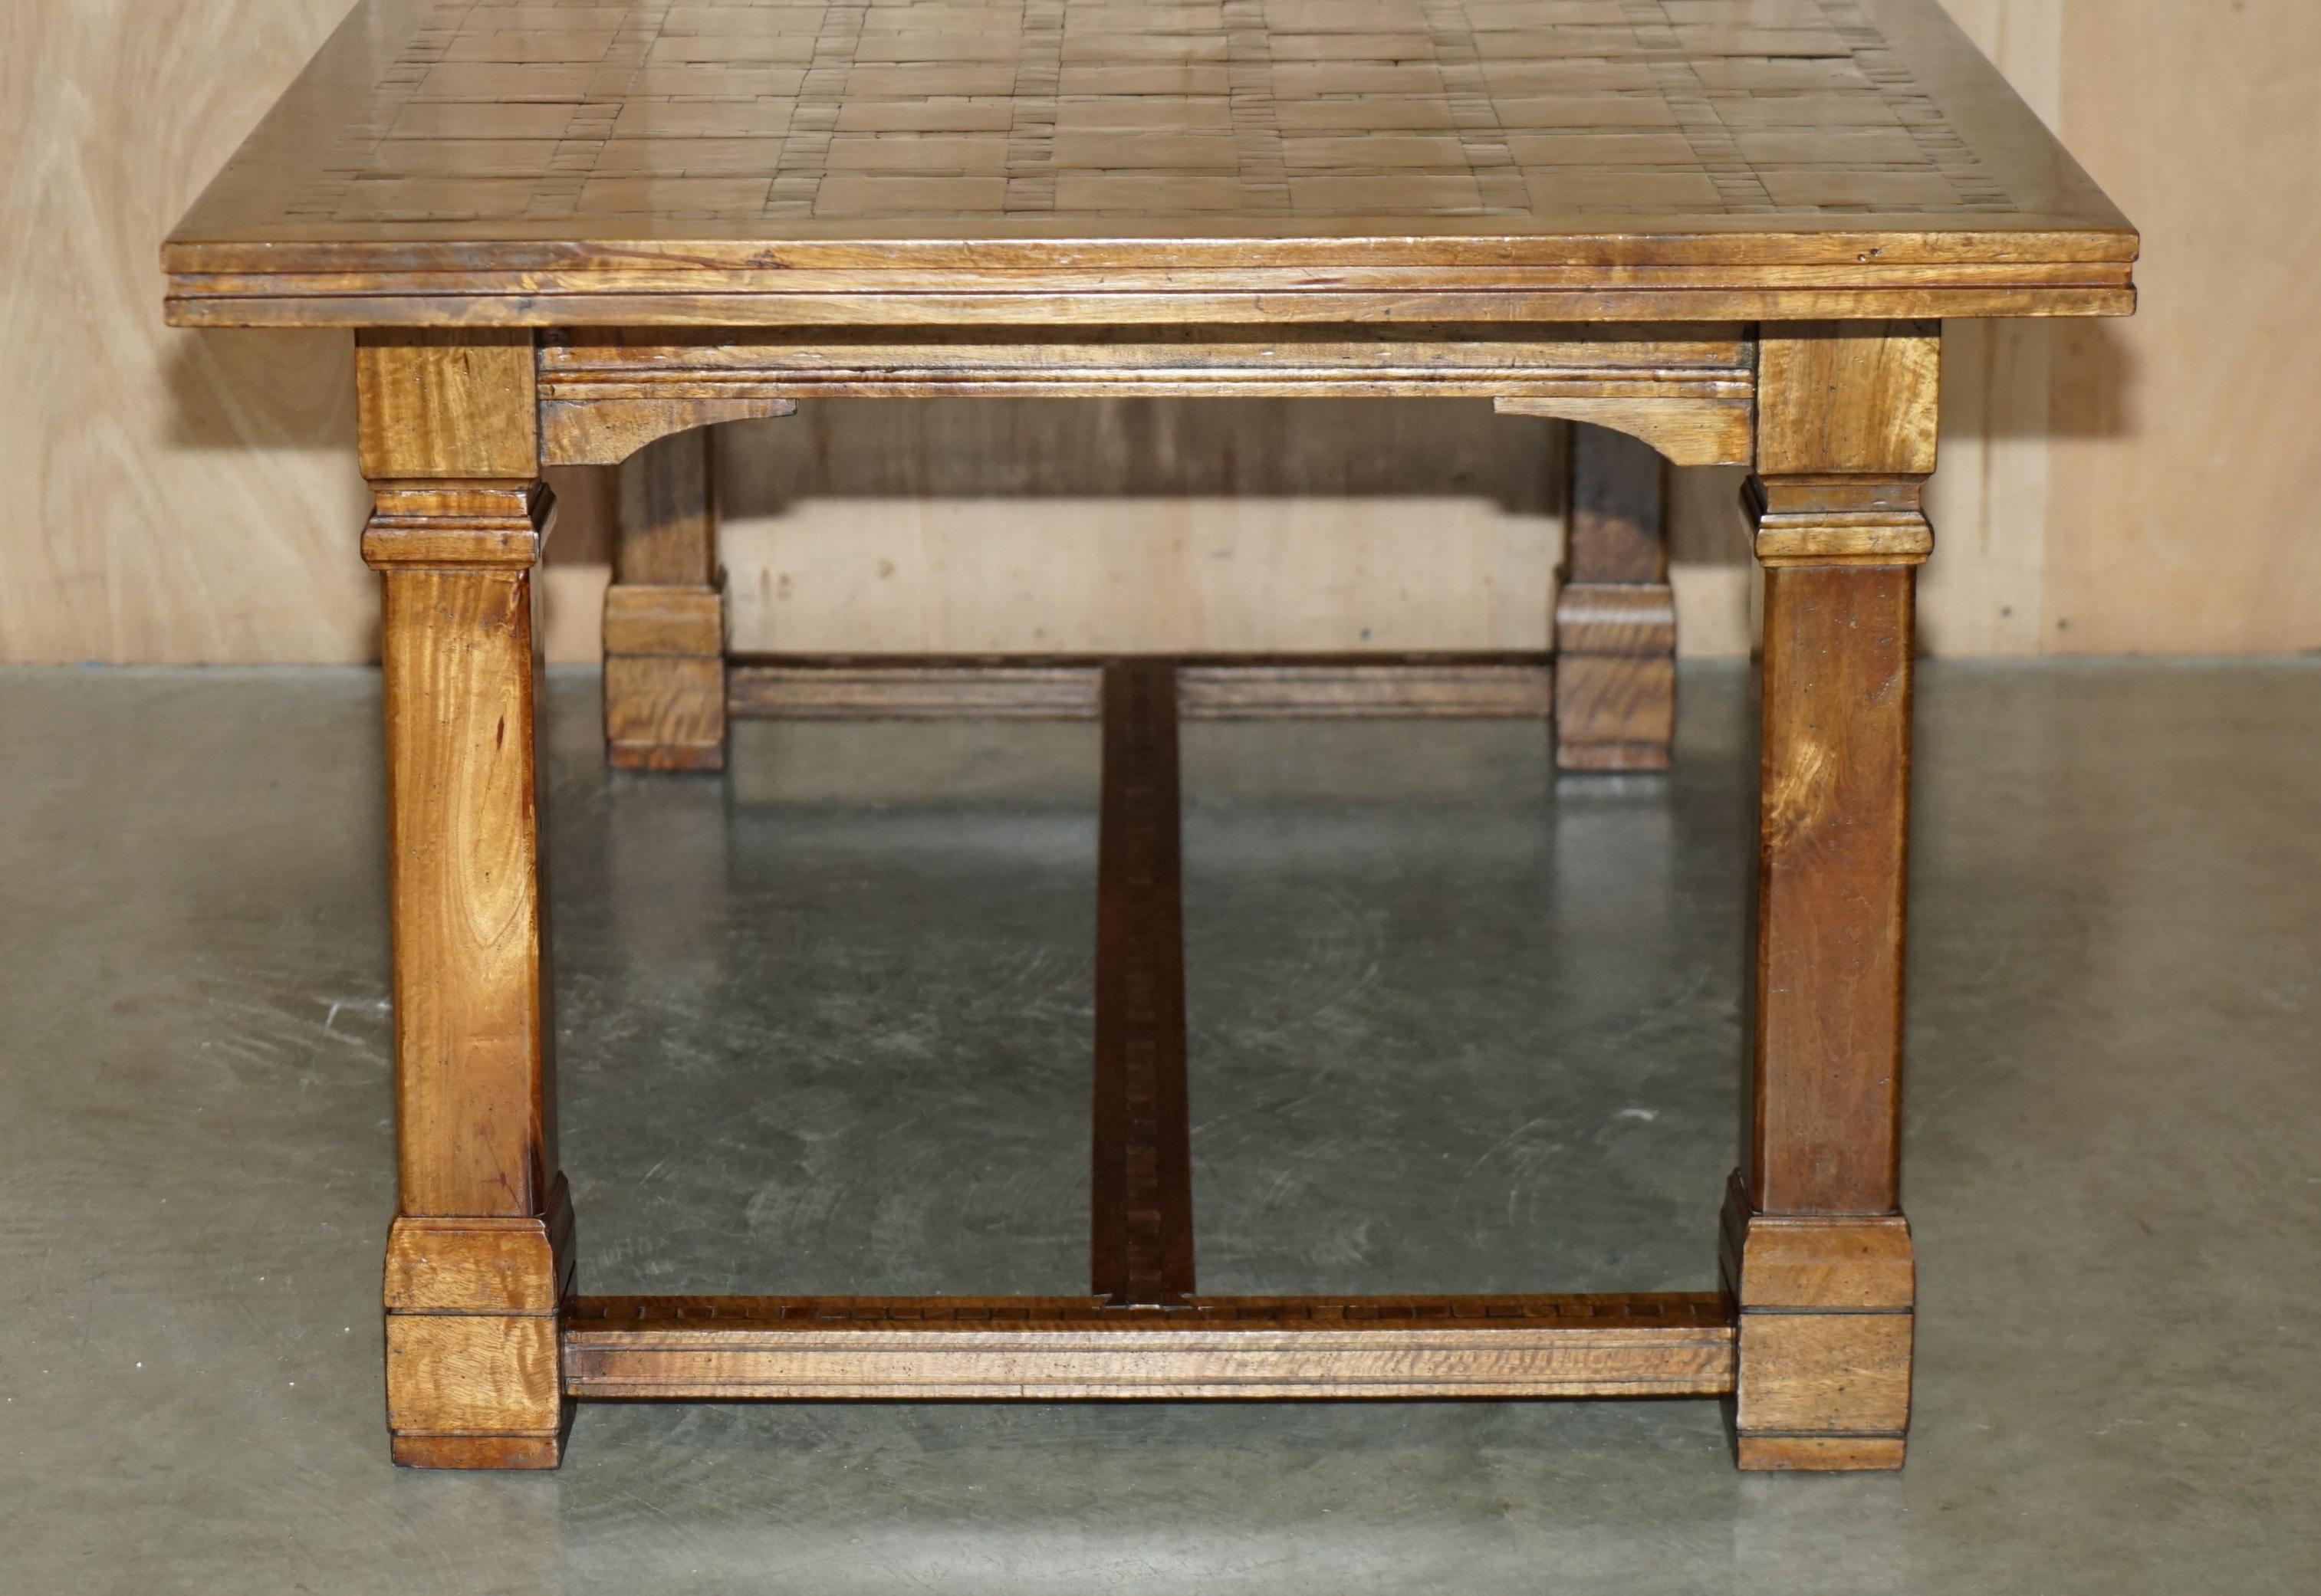 EXQUISITE ViNTAGE OYSTER VENEER & PARQUETRY INLAID REFECTORY DINING TABLE For Sale 10